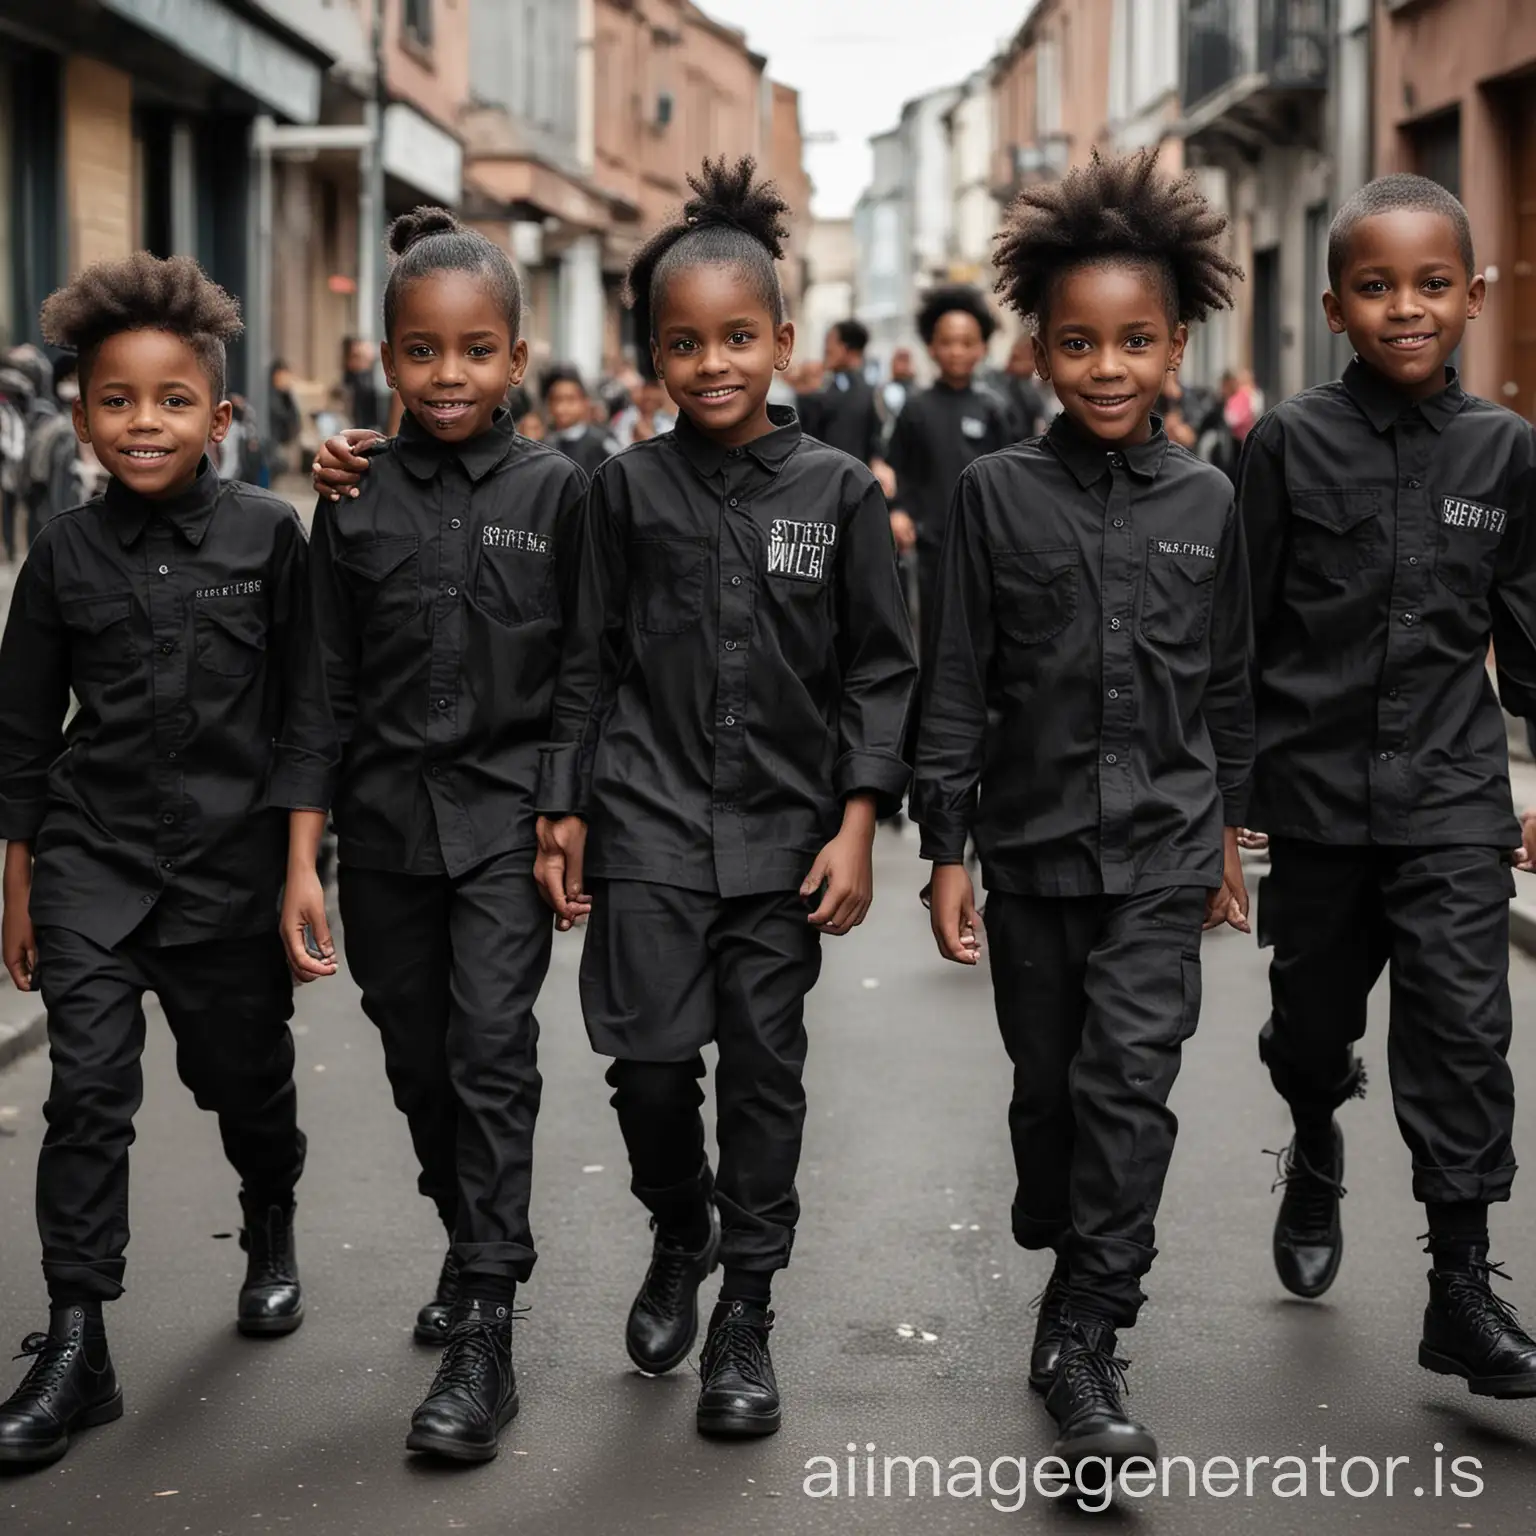 an image of steet kids becoming successful after being empowered. make children black. dressed well and performing in different things